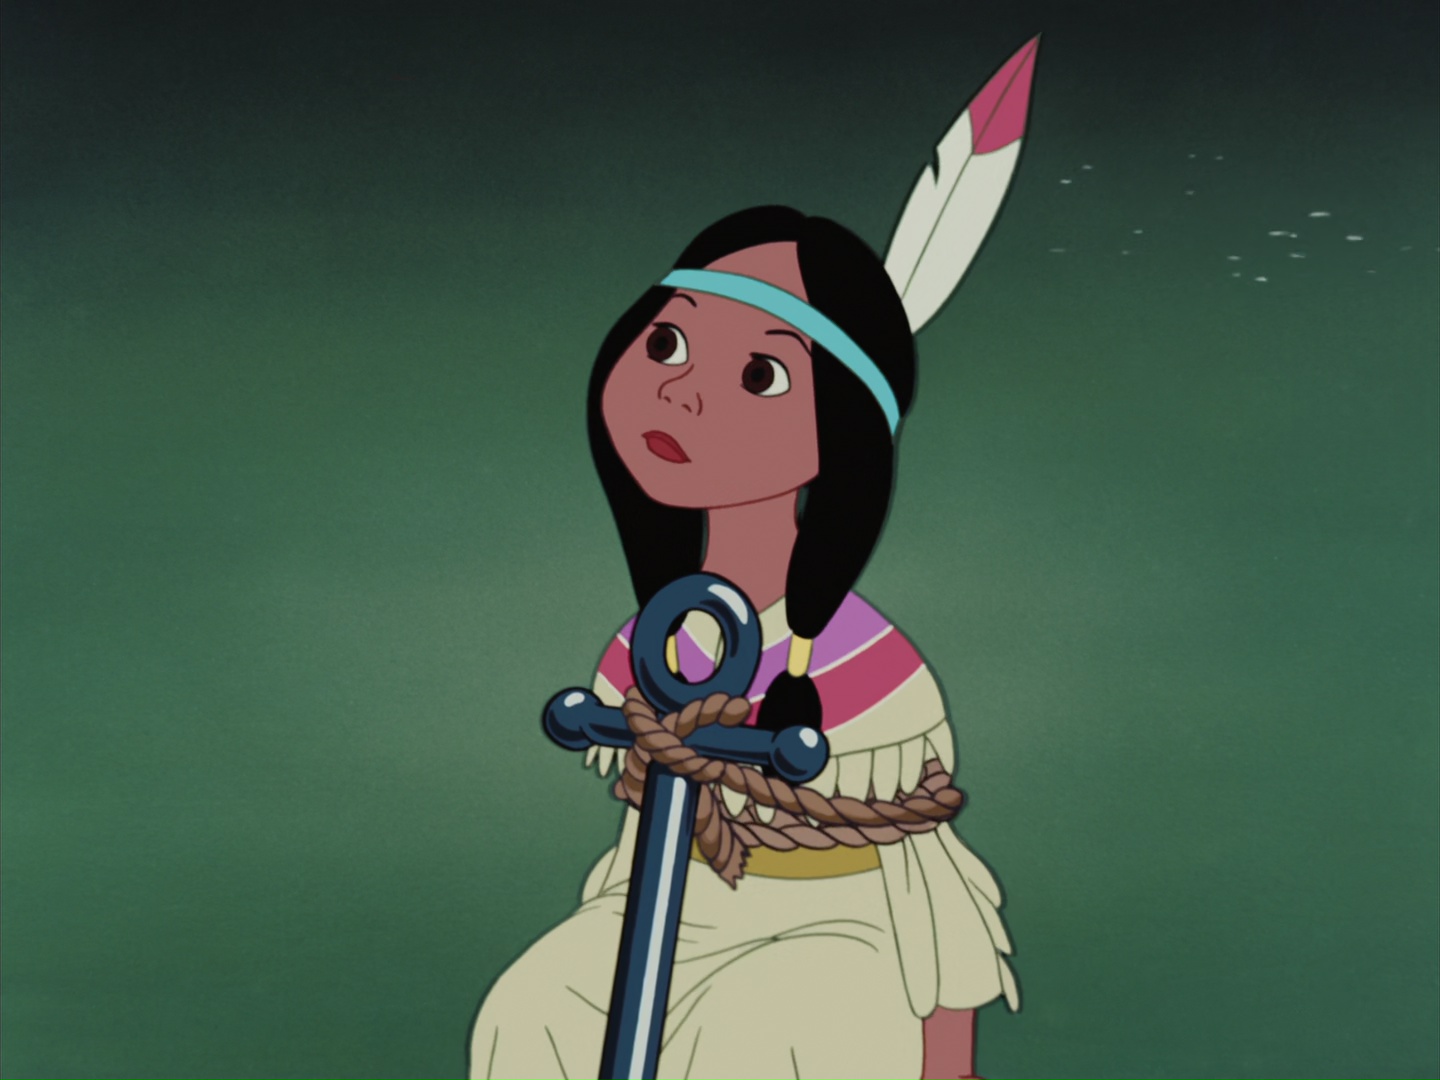 http://img2.wikia.nocookie.net/__cb20120126202603/disney/images/6/6d/Tiger_lily.jpg